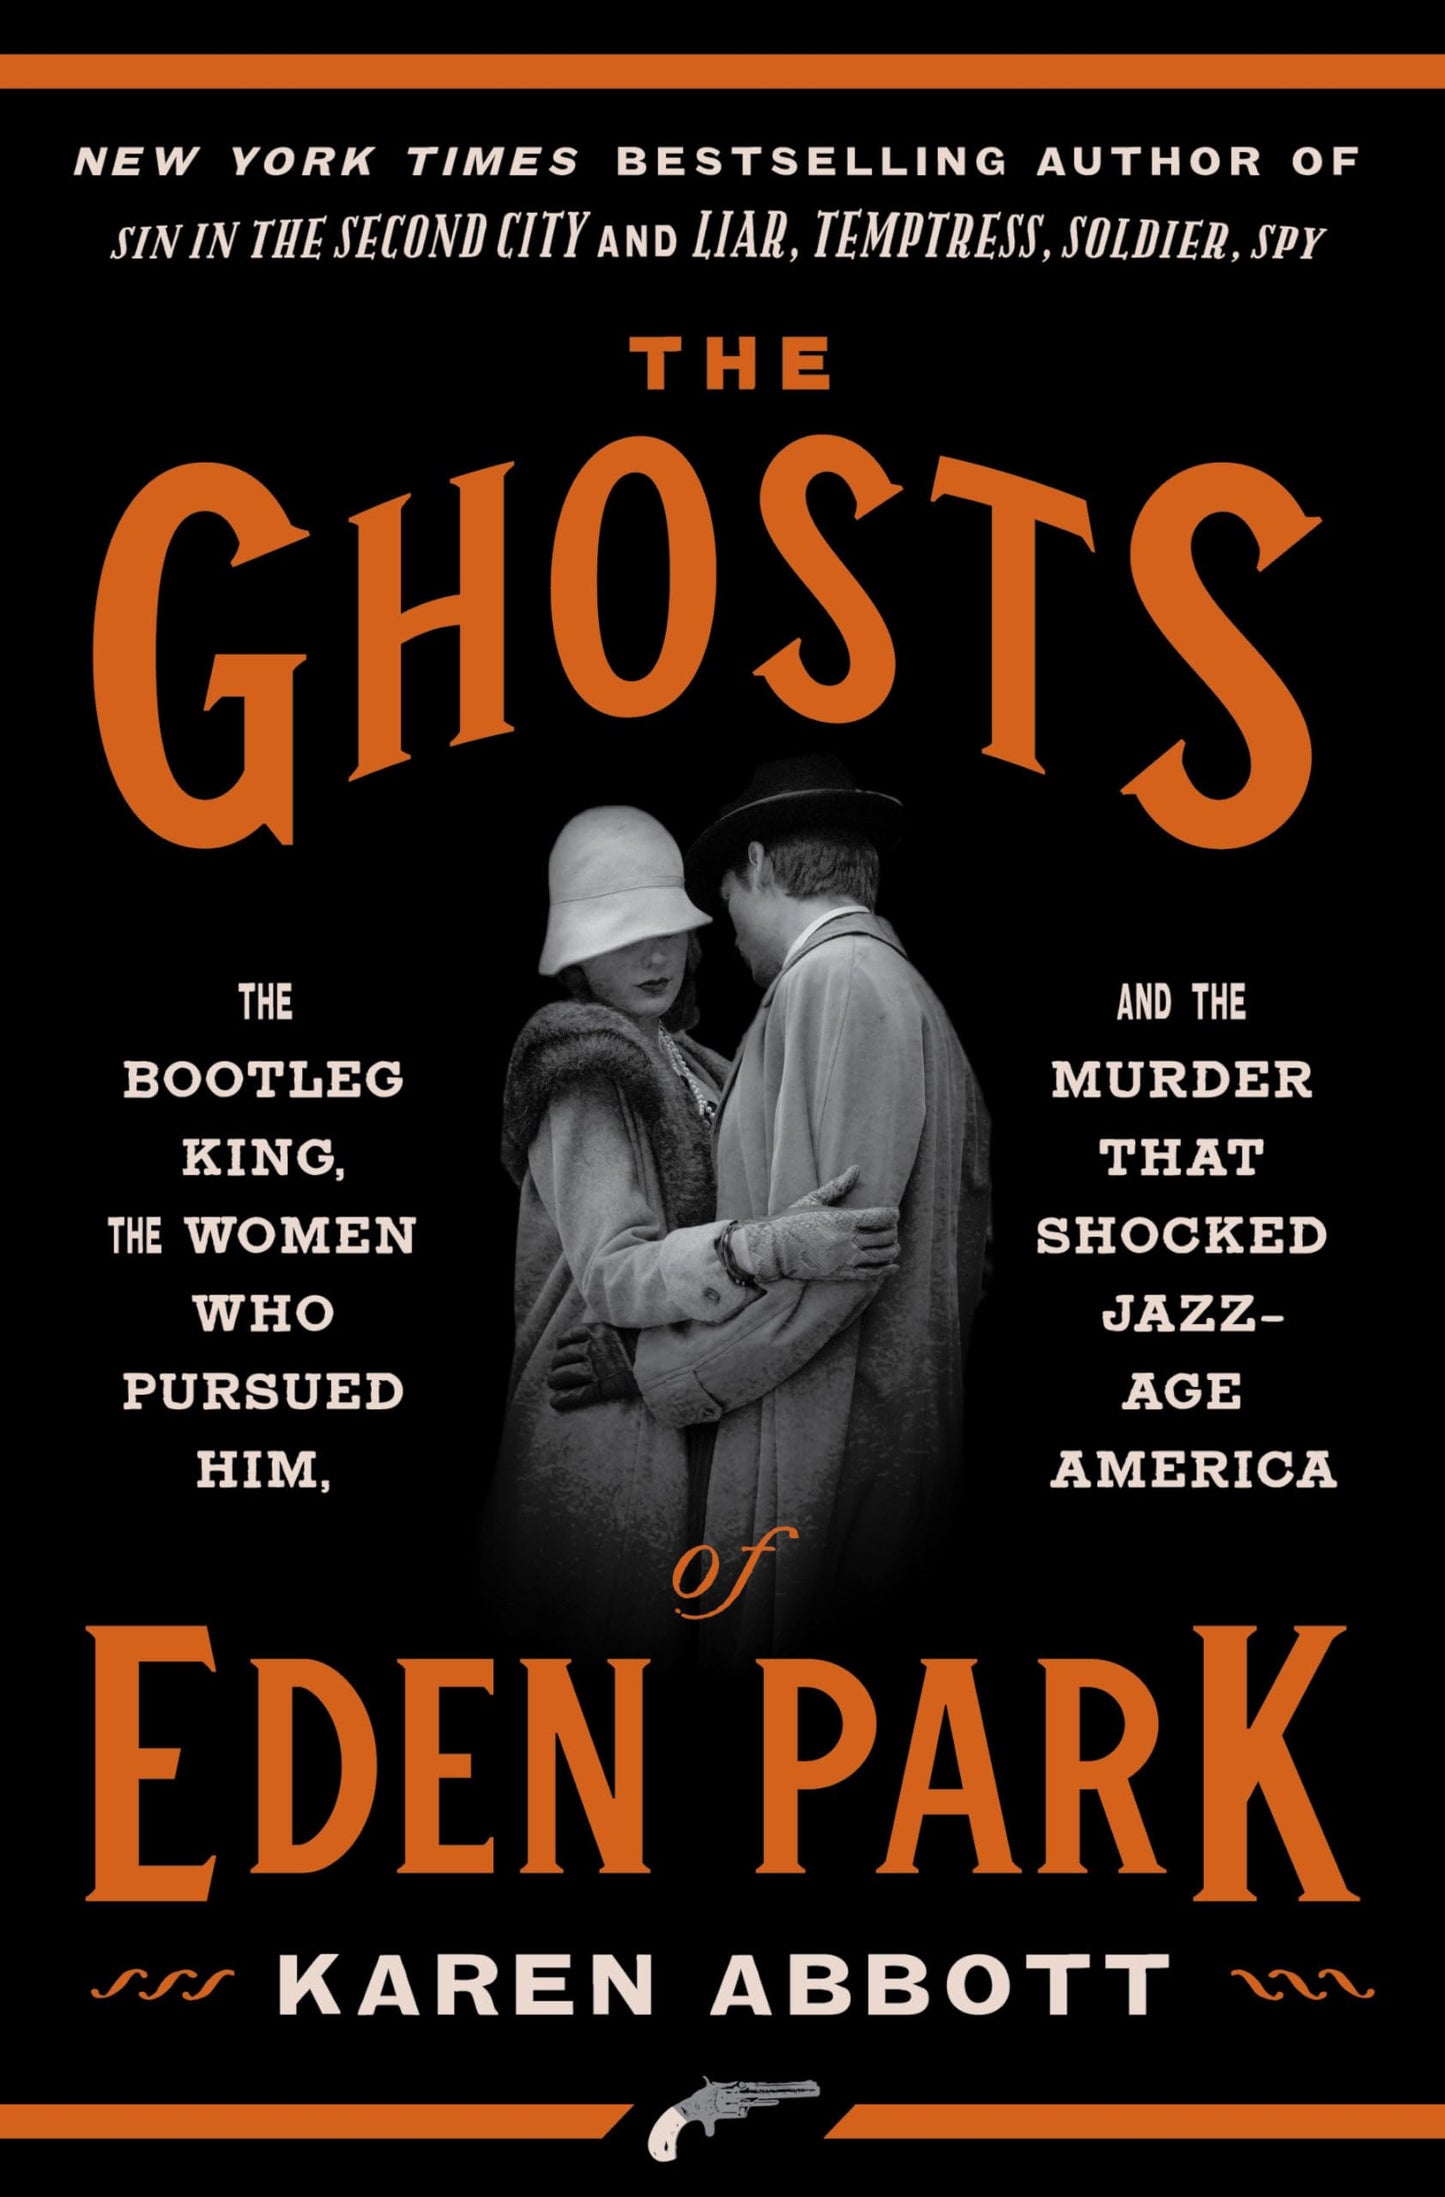 Ghosts of Eden Park: The Bootleg King, the Women Who Pursued Him, and the Murder That Shocked Jazz-Age America